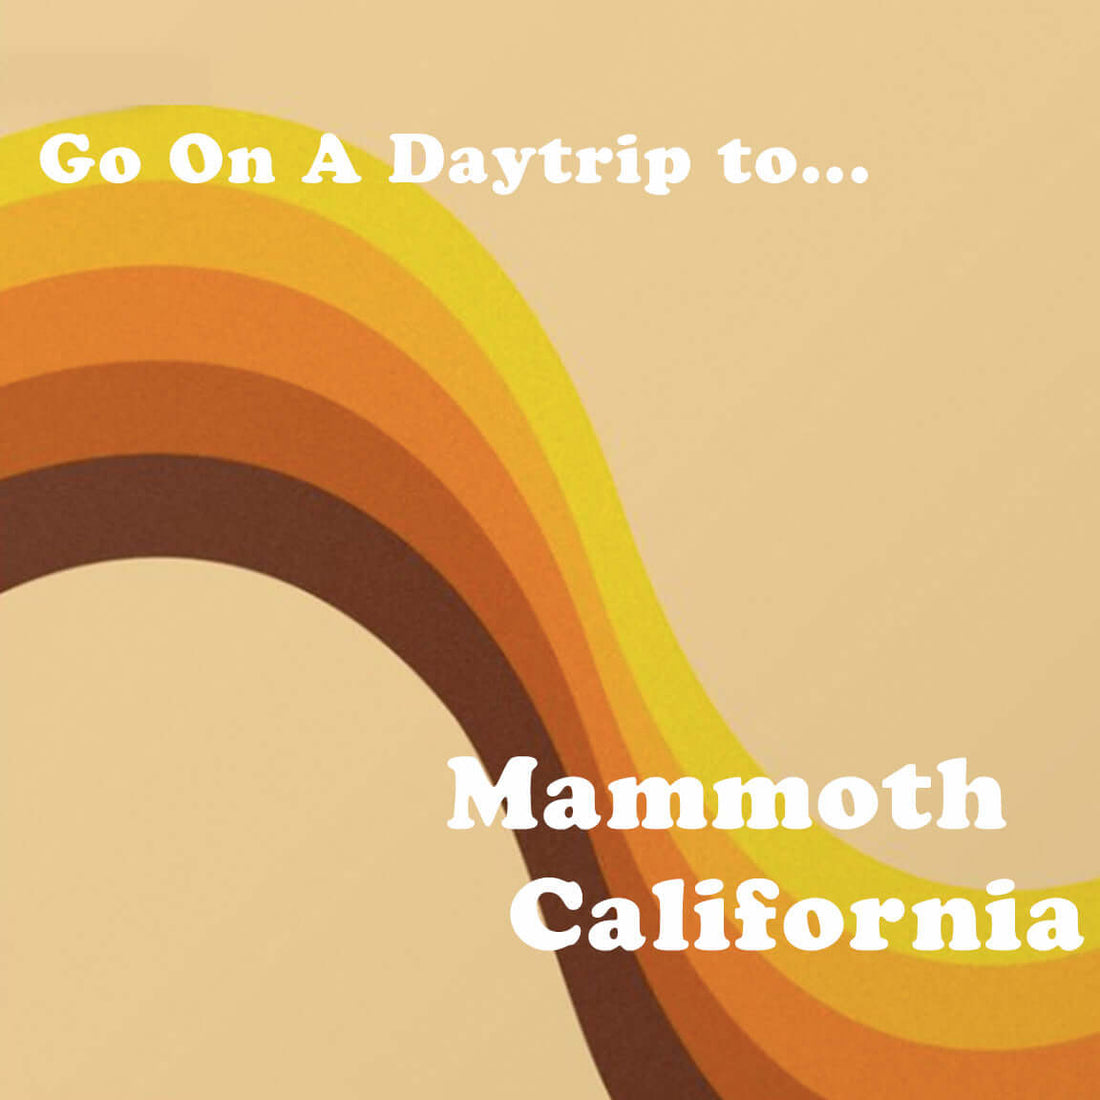 Graphic title image for the LA to Mammoth blog post with vintage graphic elements